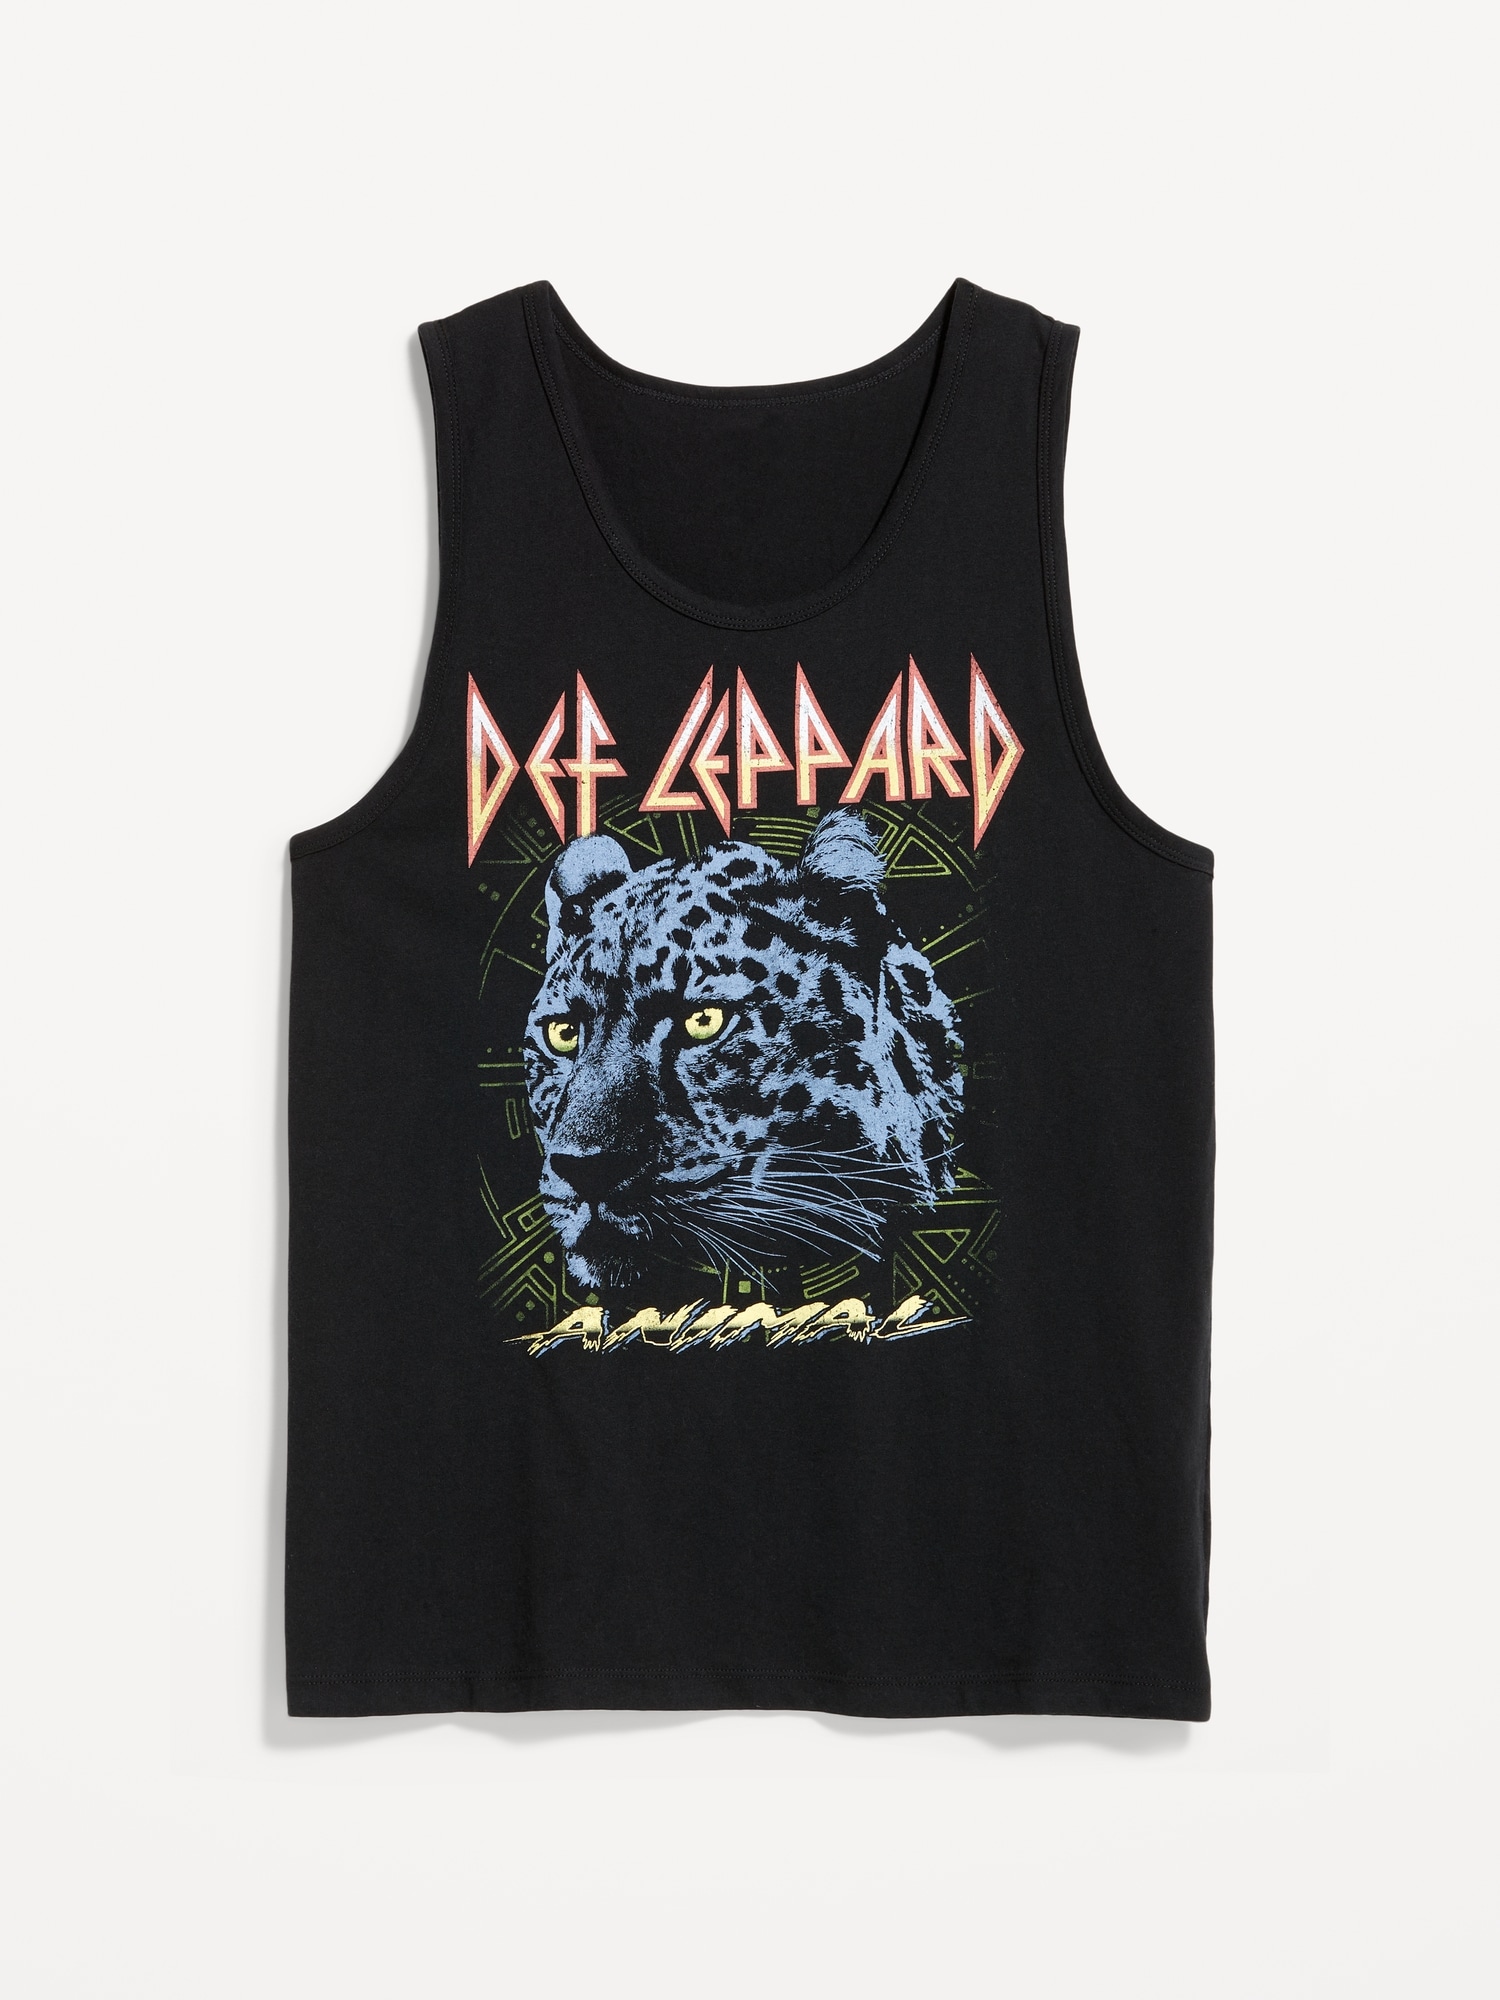 Old Navy Def Leppard™ Gender-Neutral Tank Top for Adults black. 1